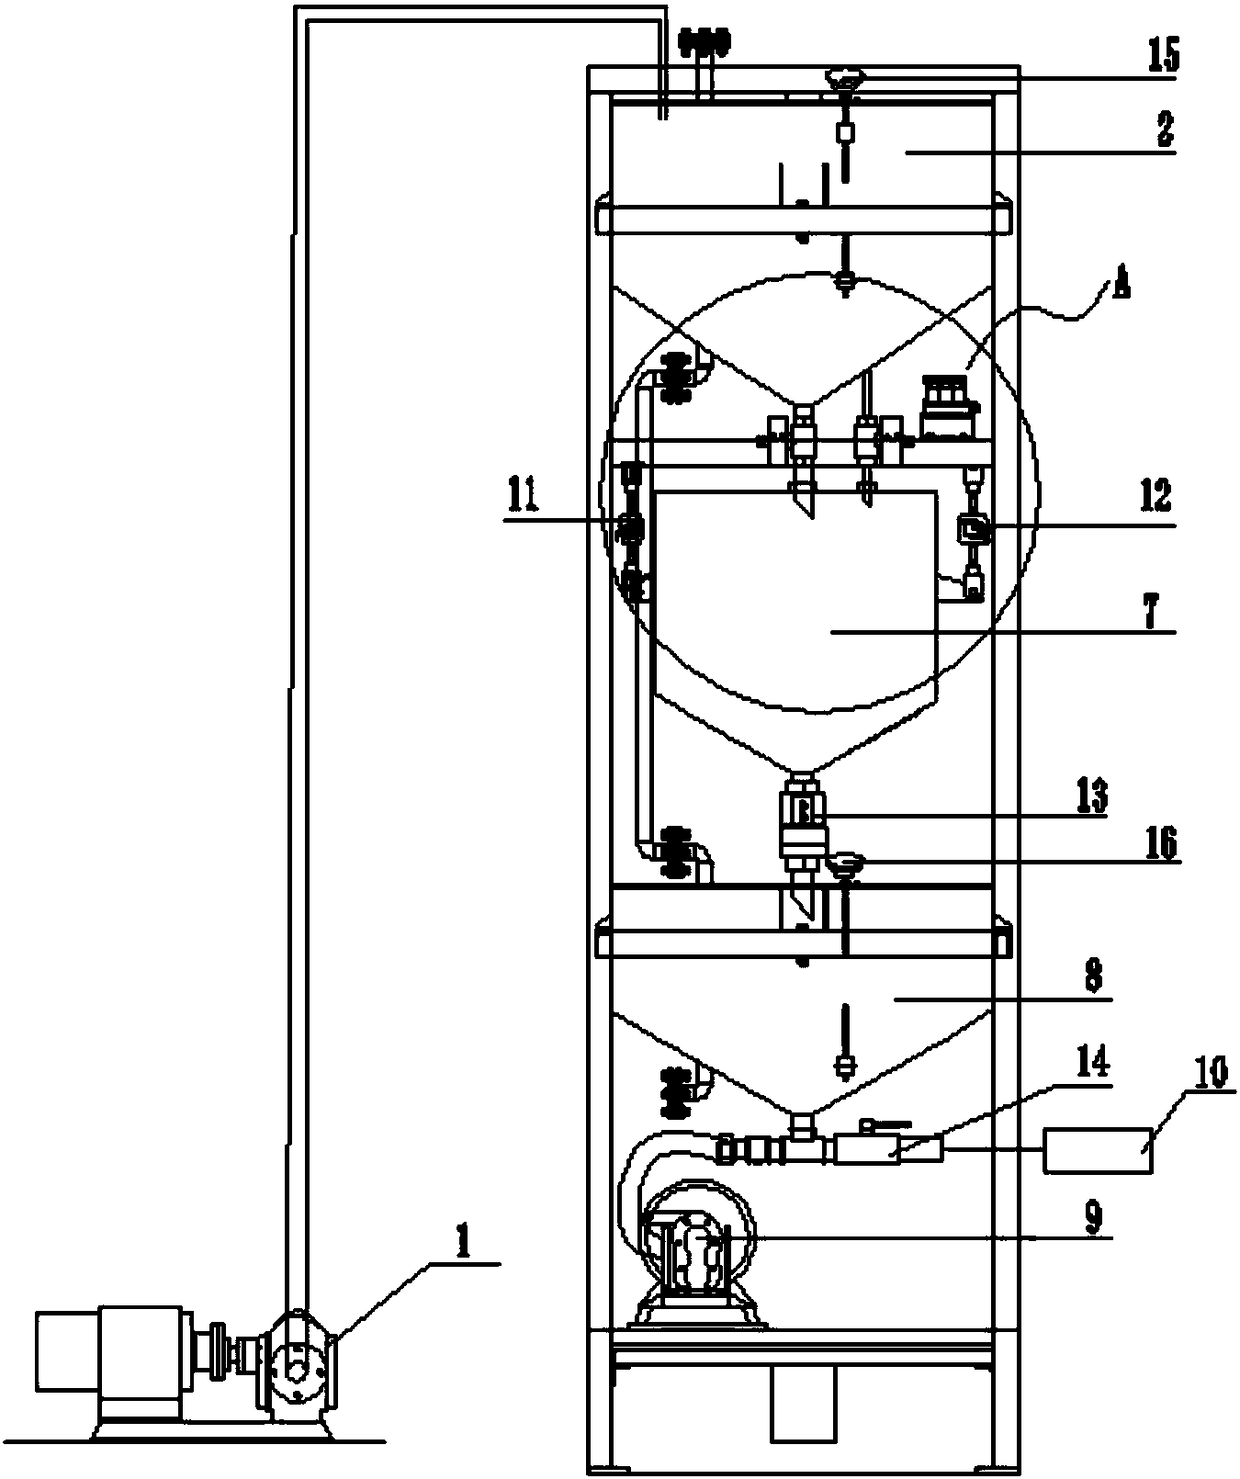 A feed oil adding device